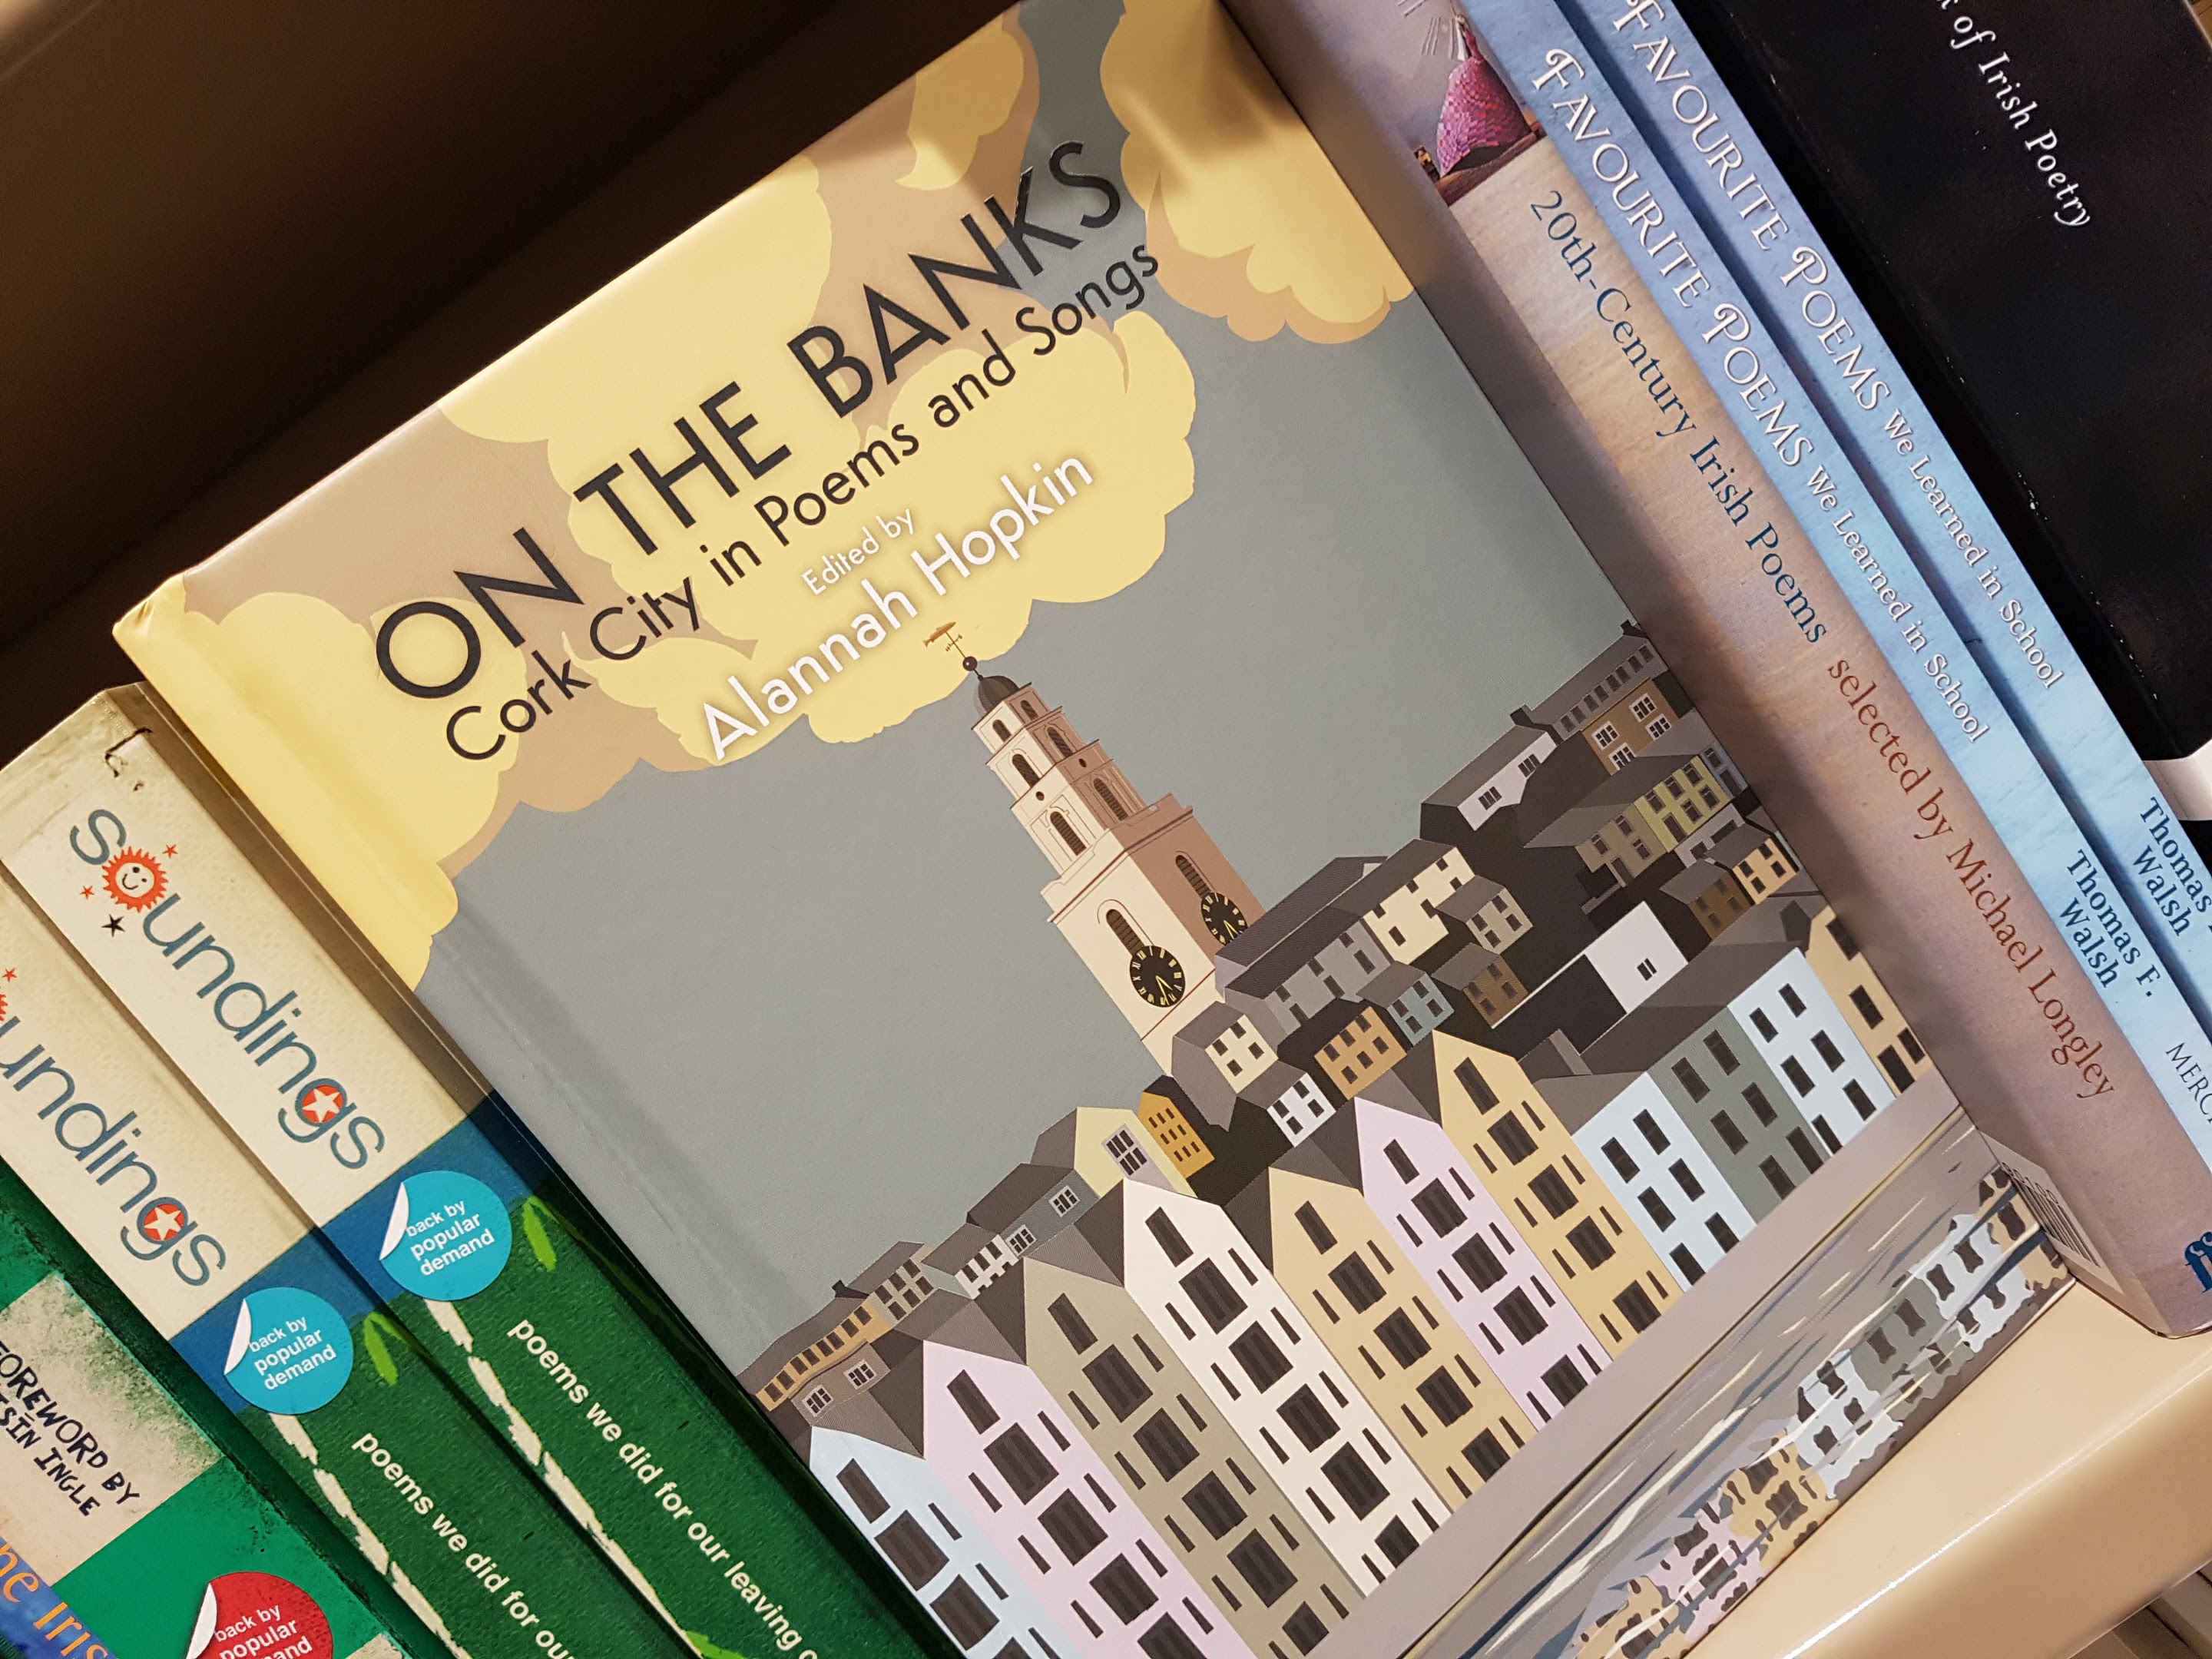 On the Banks – poetry about Cork City